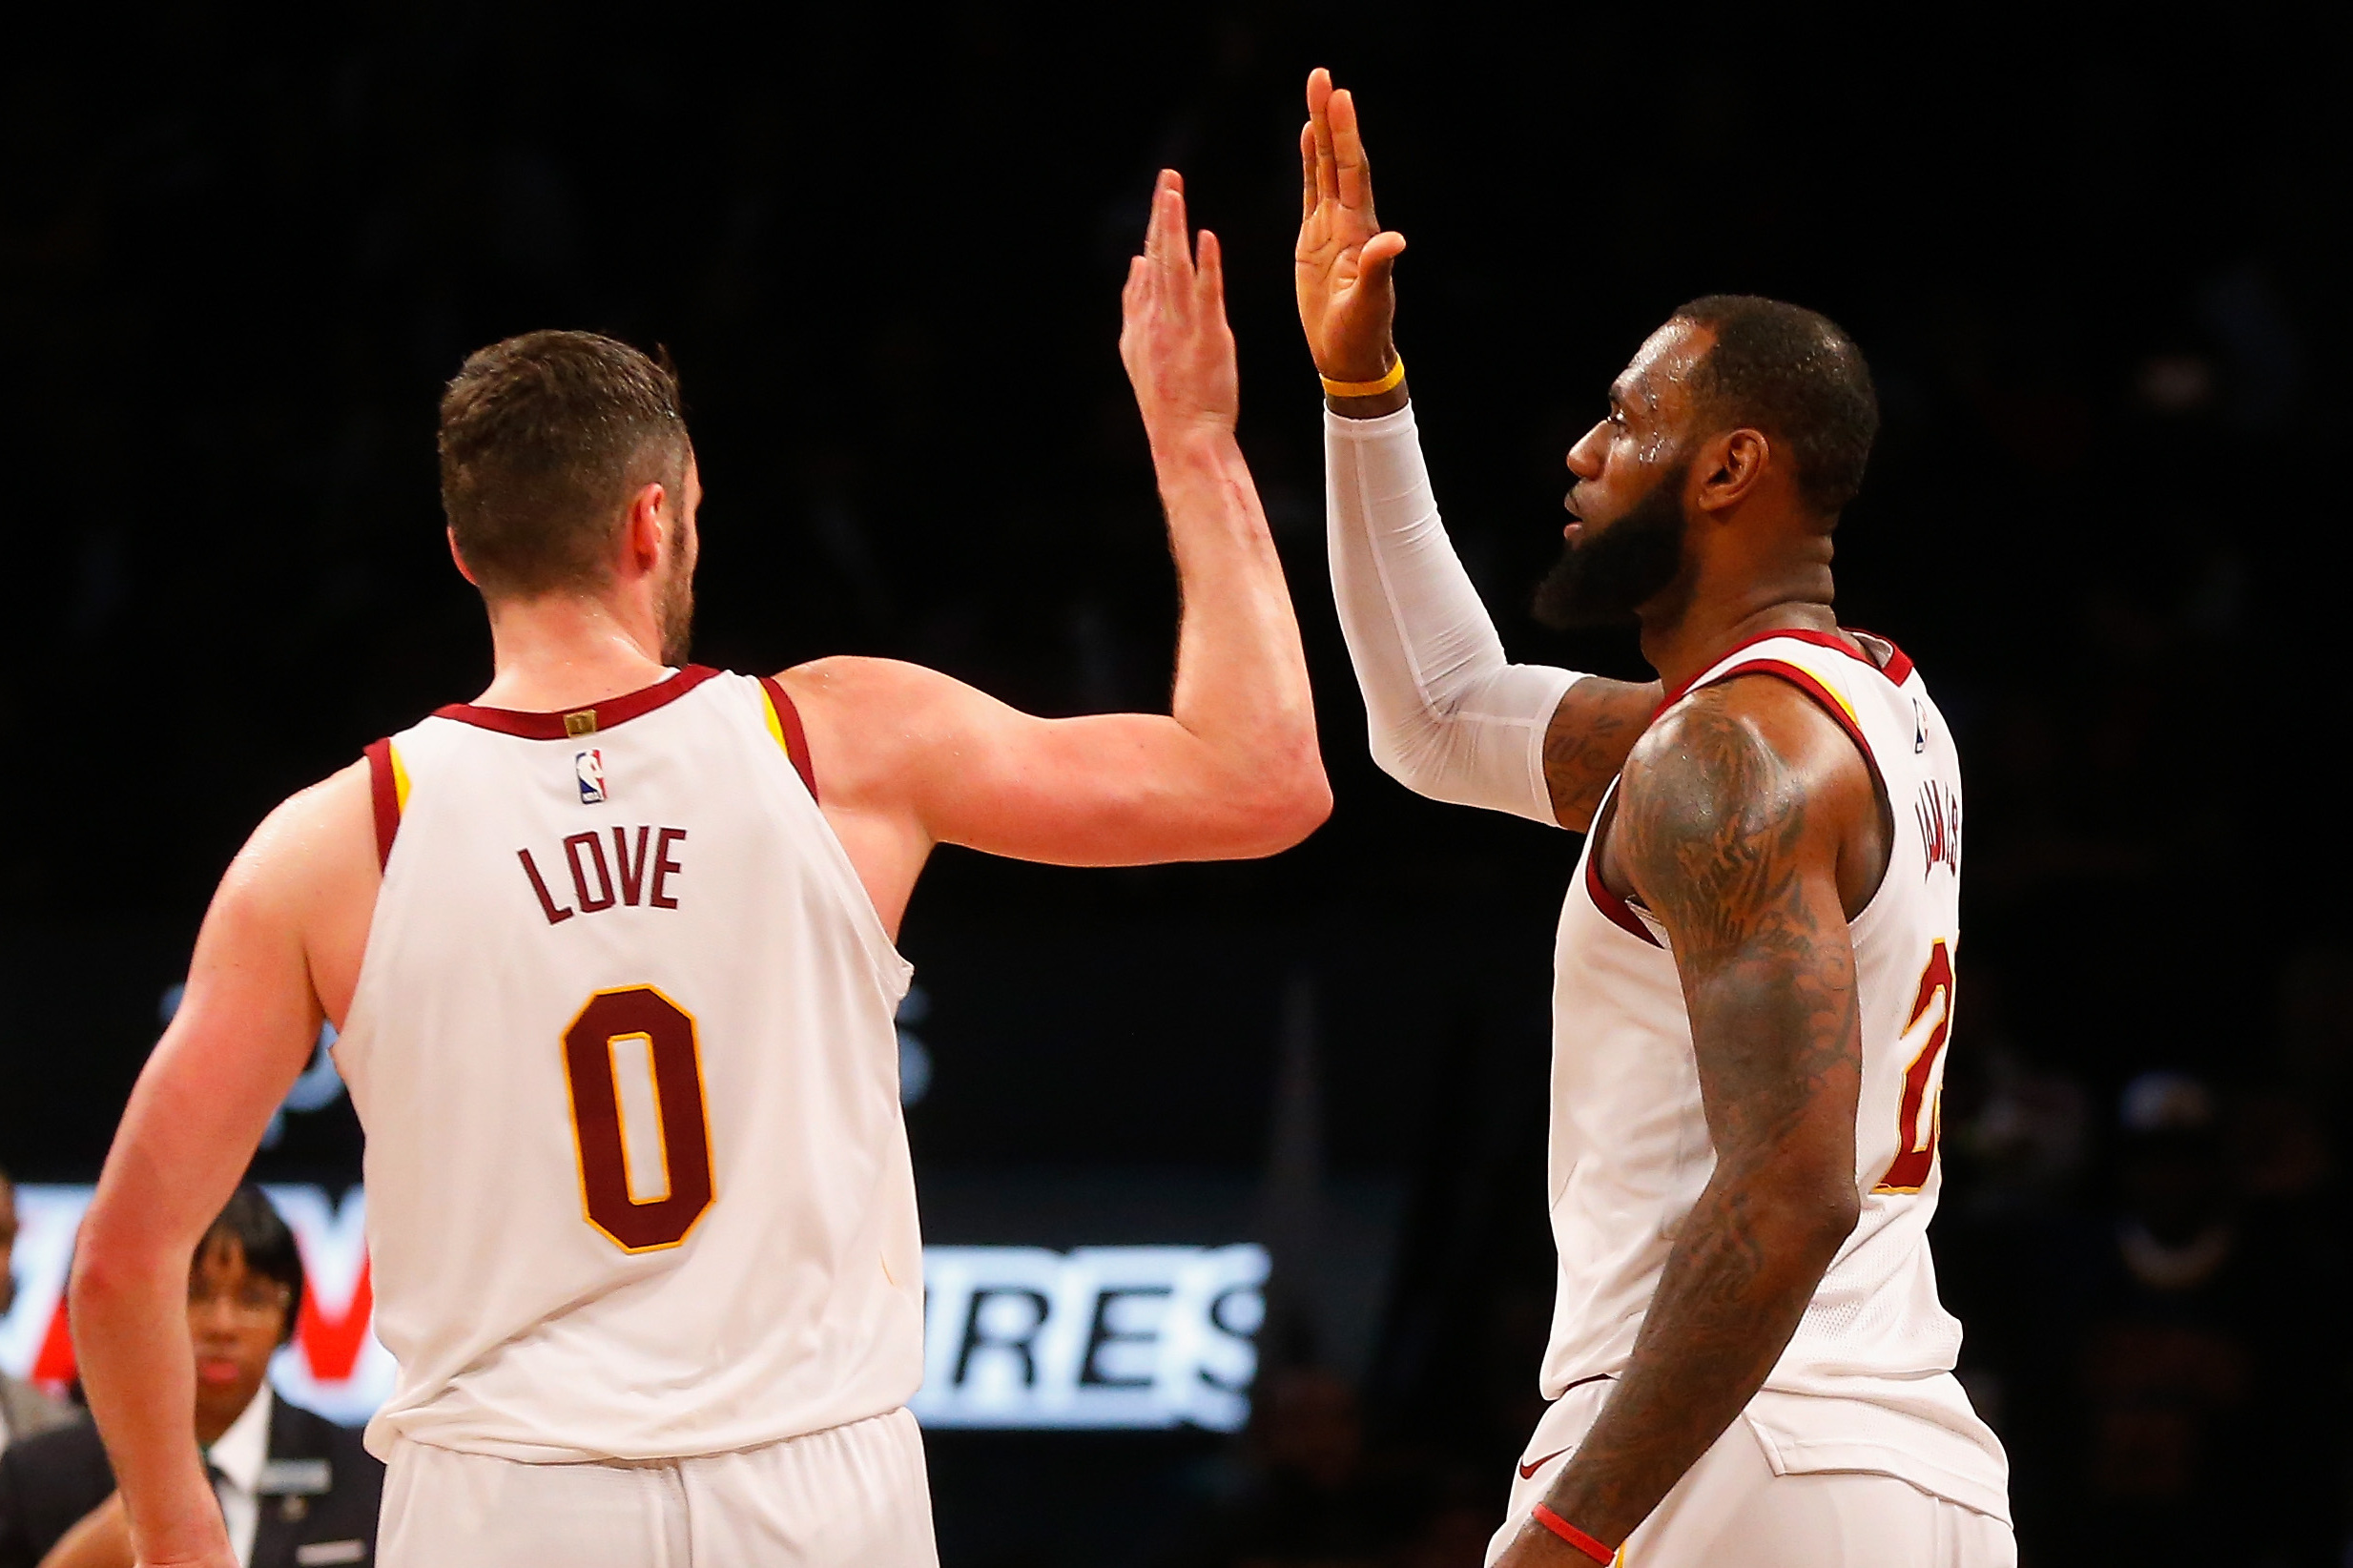 LeBron James Impact Review 2018-2019: Cavaliers Fallout, Lakers Future